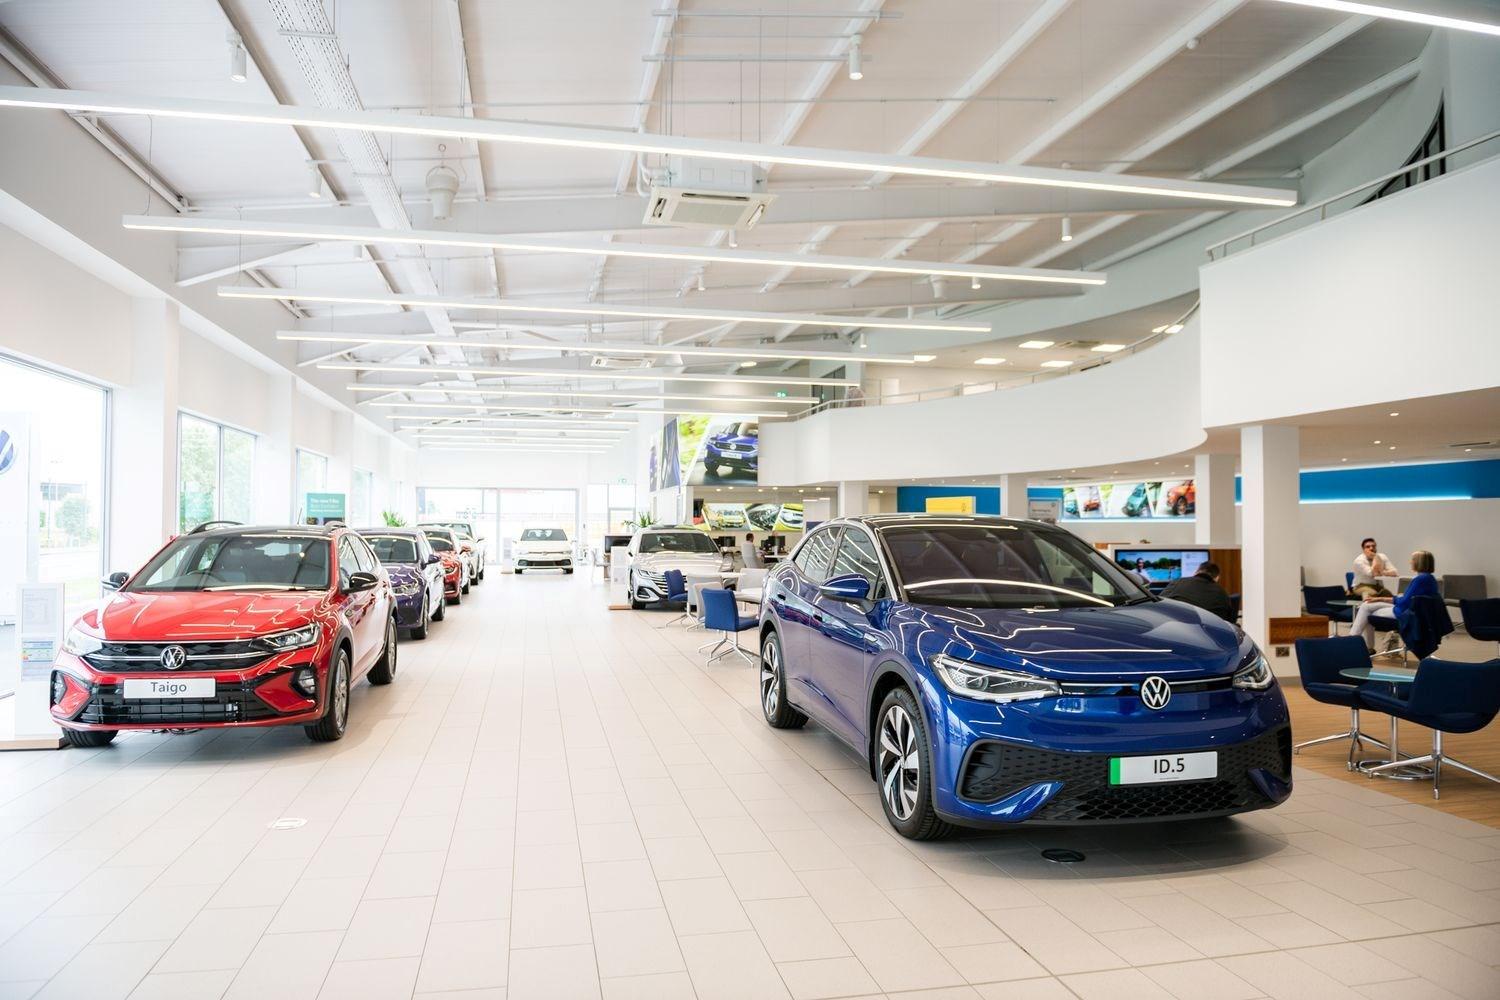 The Agnew Volkswagen Belfast showroom featuring some of the latest range of Volkswagen new cars. On display, is a blue Volkswagen ID.5 and a red Volkswagen Taigo.